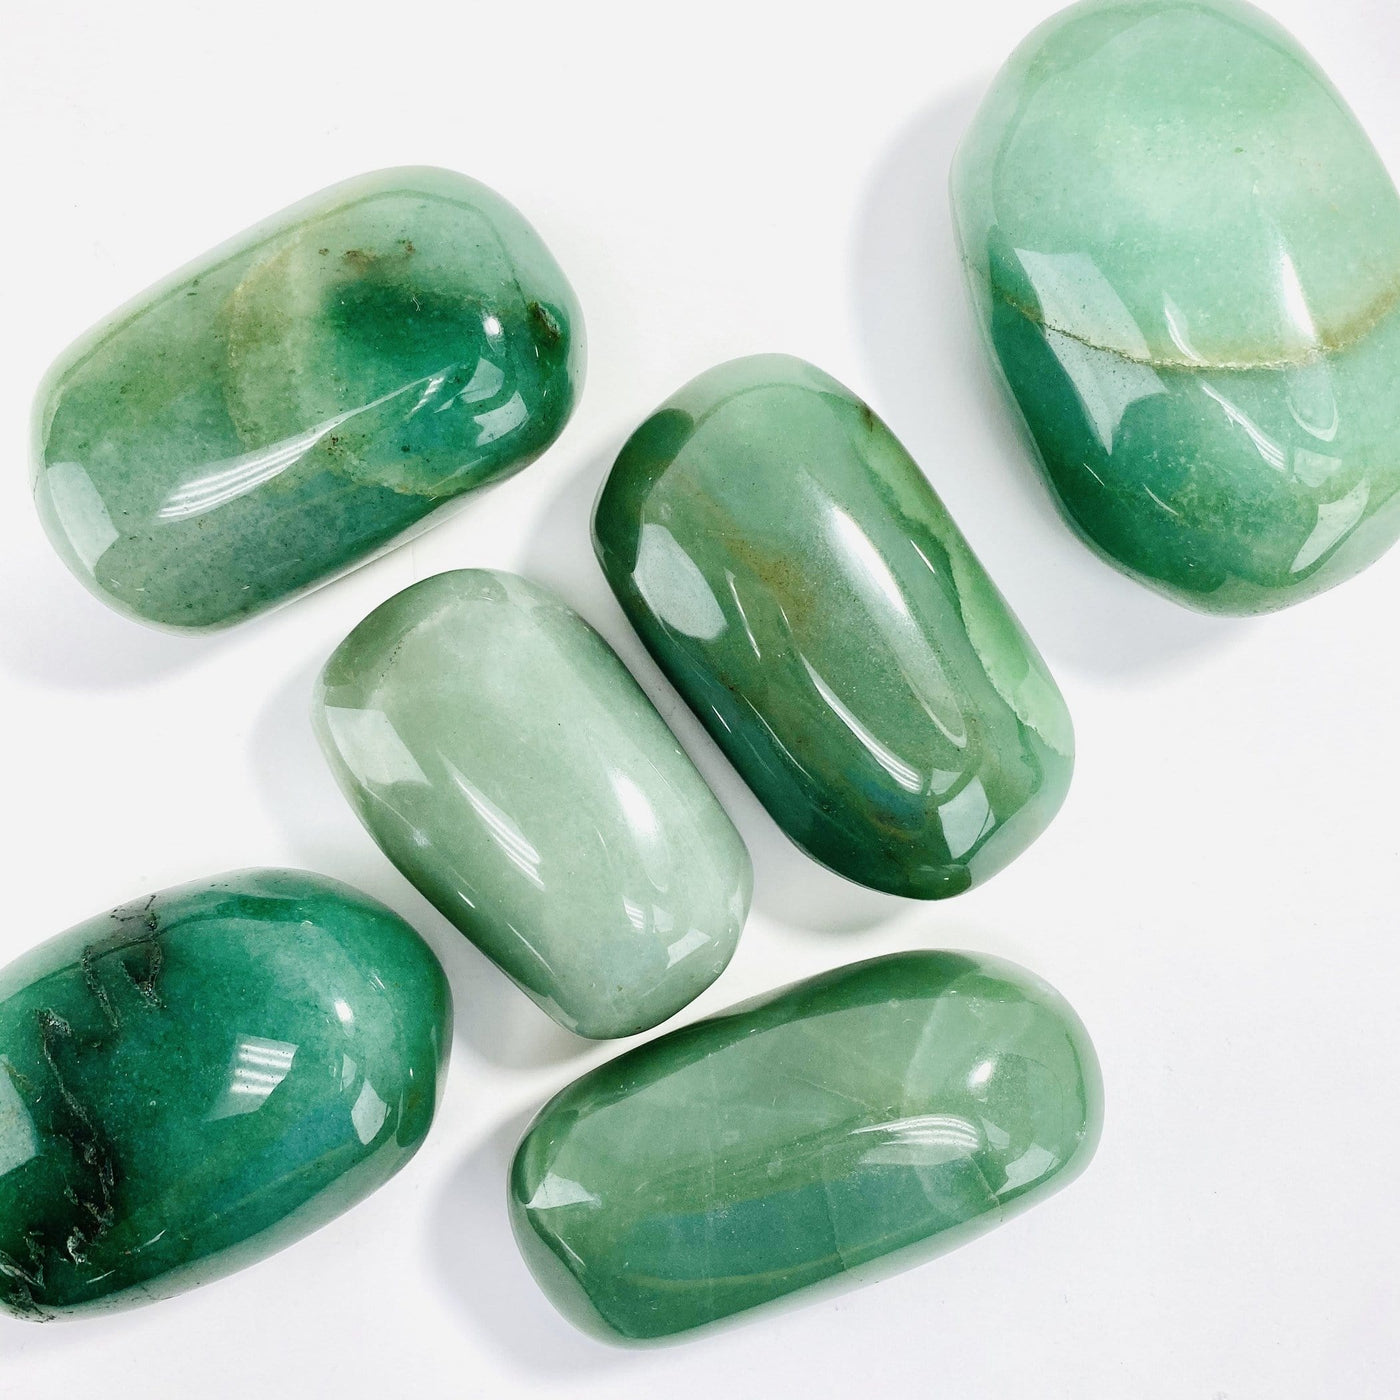 Green Aventurine Large Tumbled Stones scattered on a table